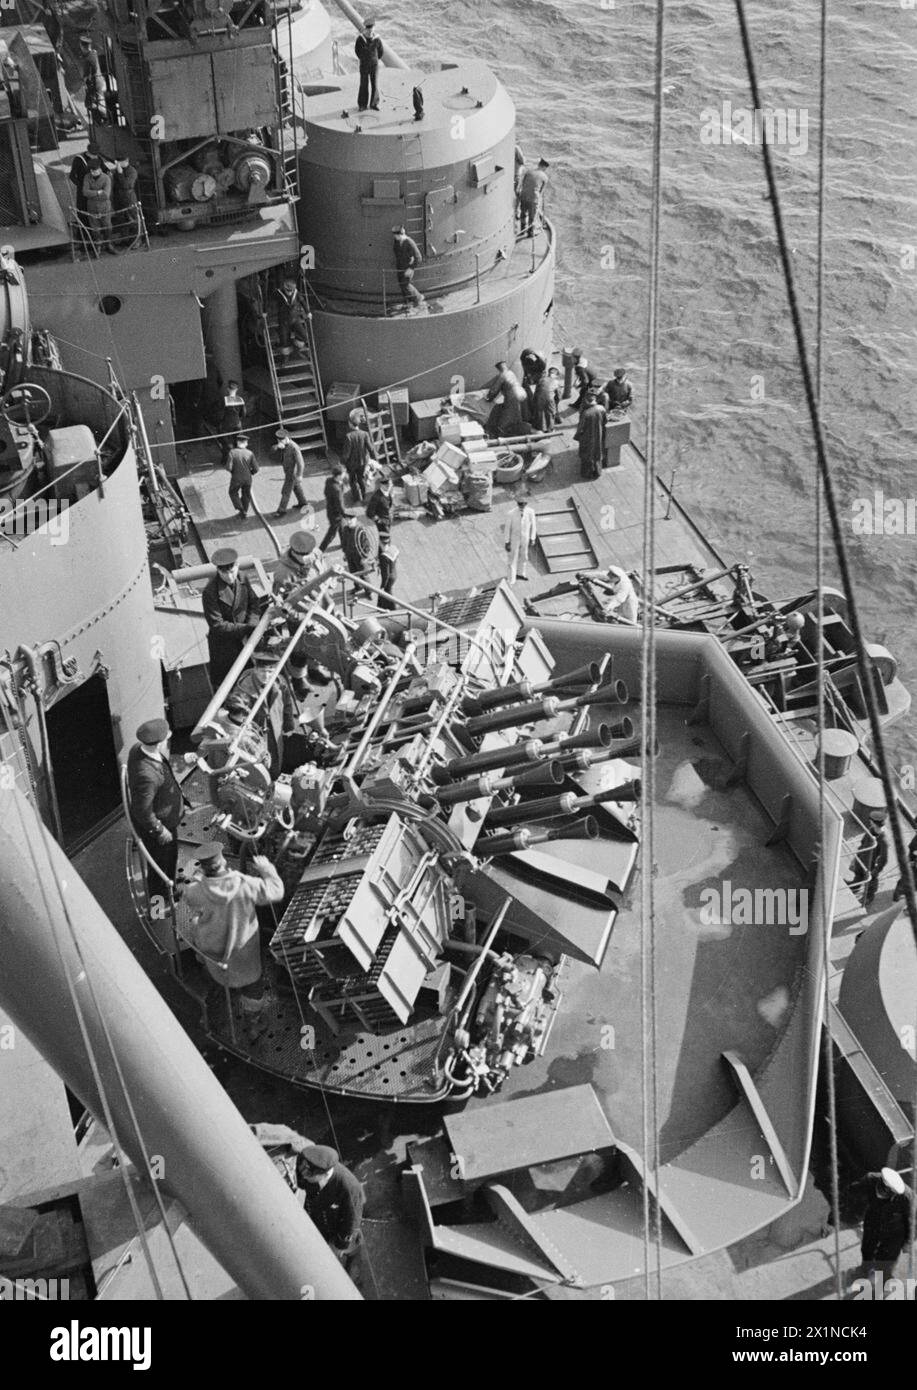 ON BOARD THE BATTLESHIP HMS PRINCE OF WALES. 1941. - Looking down on the pom-pom deck in the foreground with the catapult deck beyond, Stock Photo